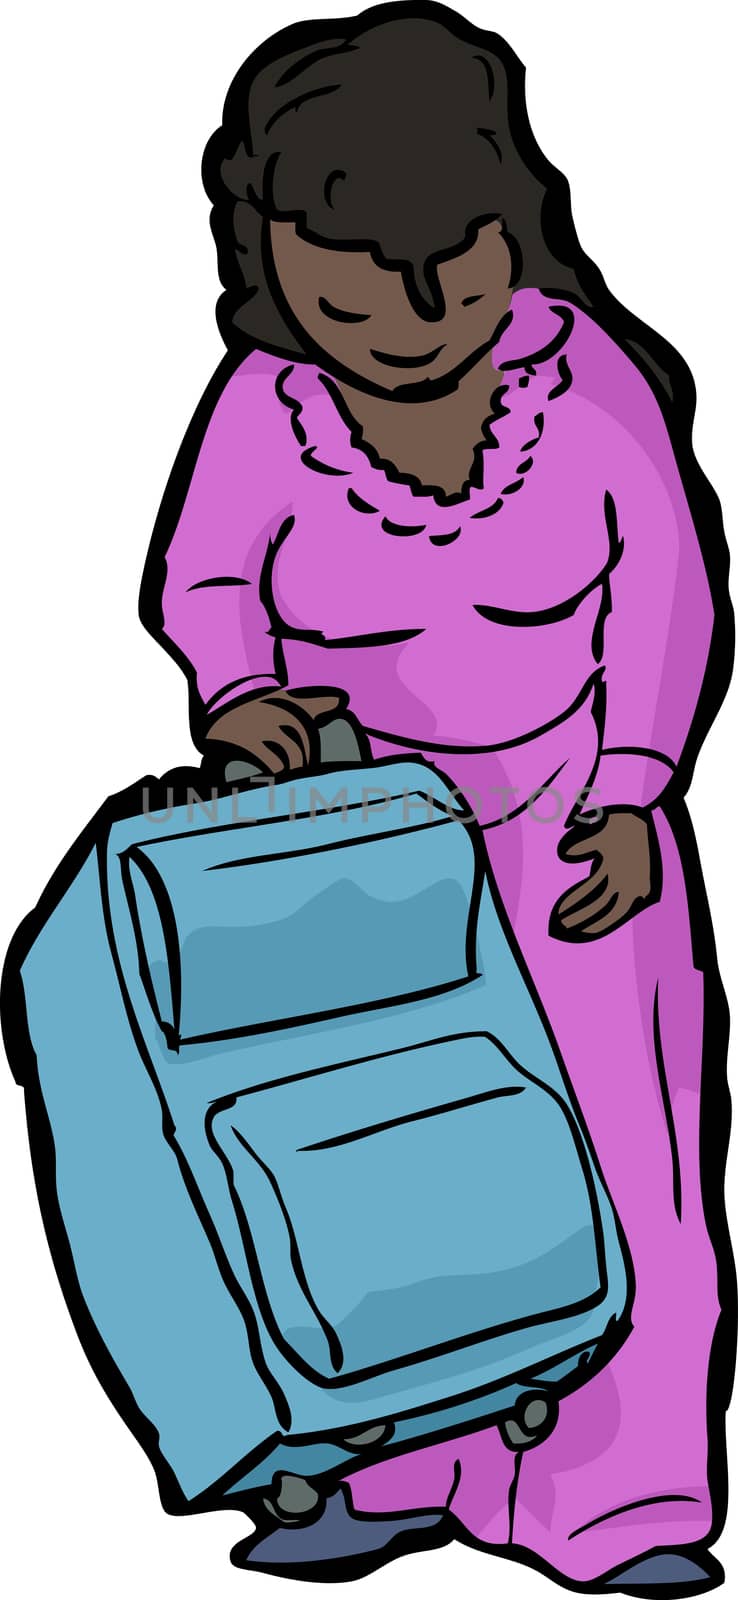 Woman with Suitcase by TheBlackRhino